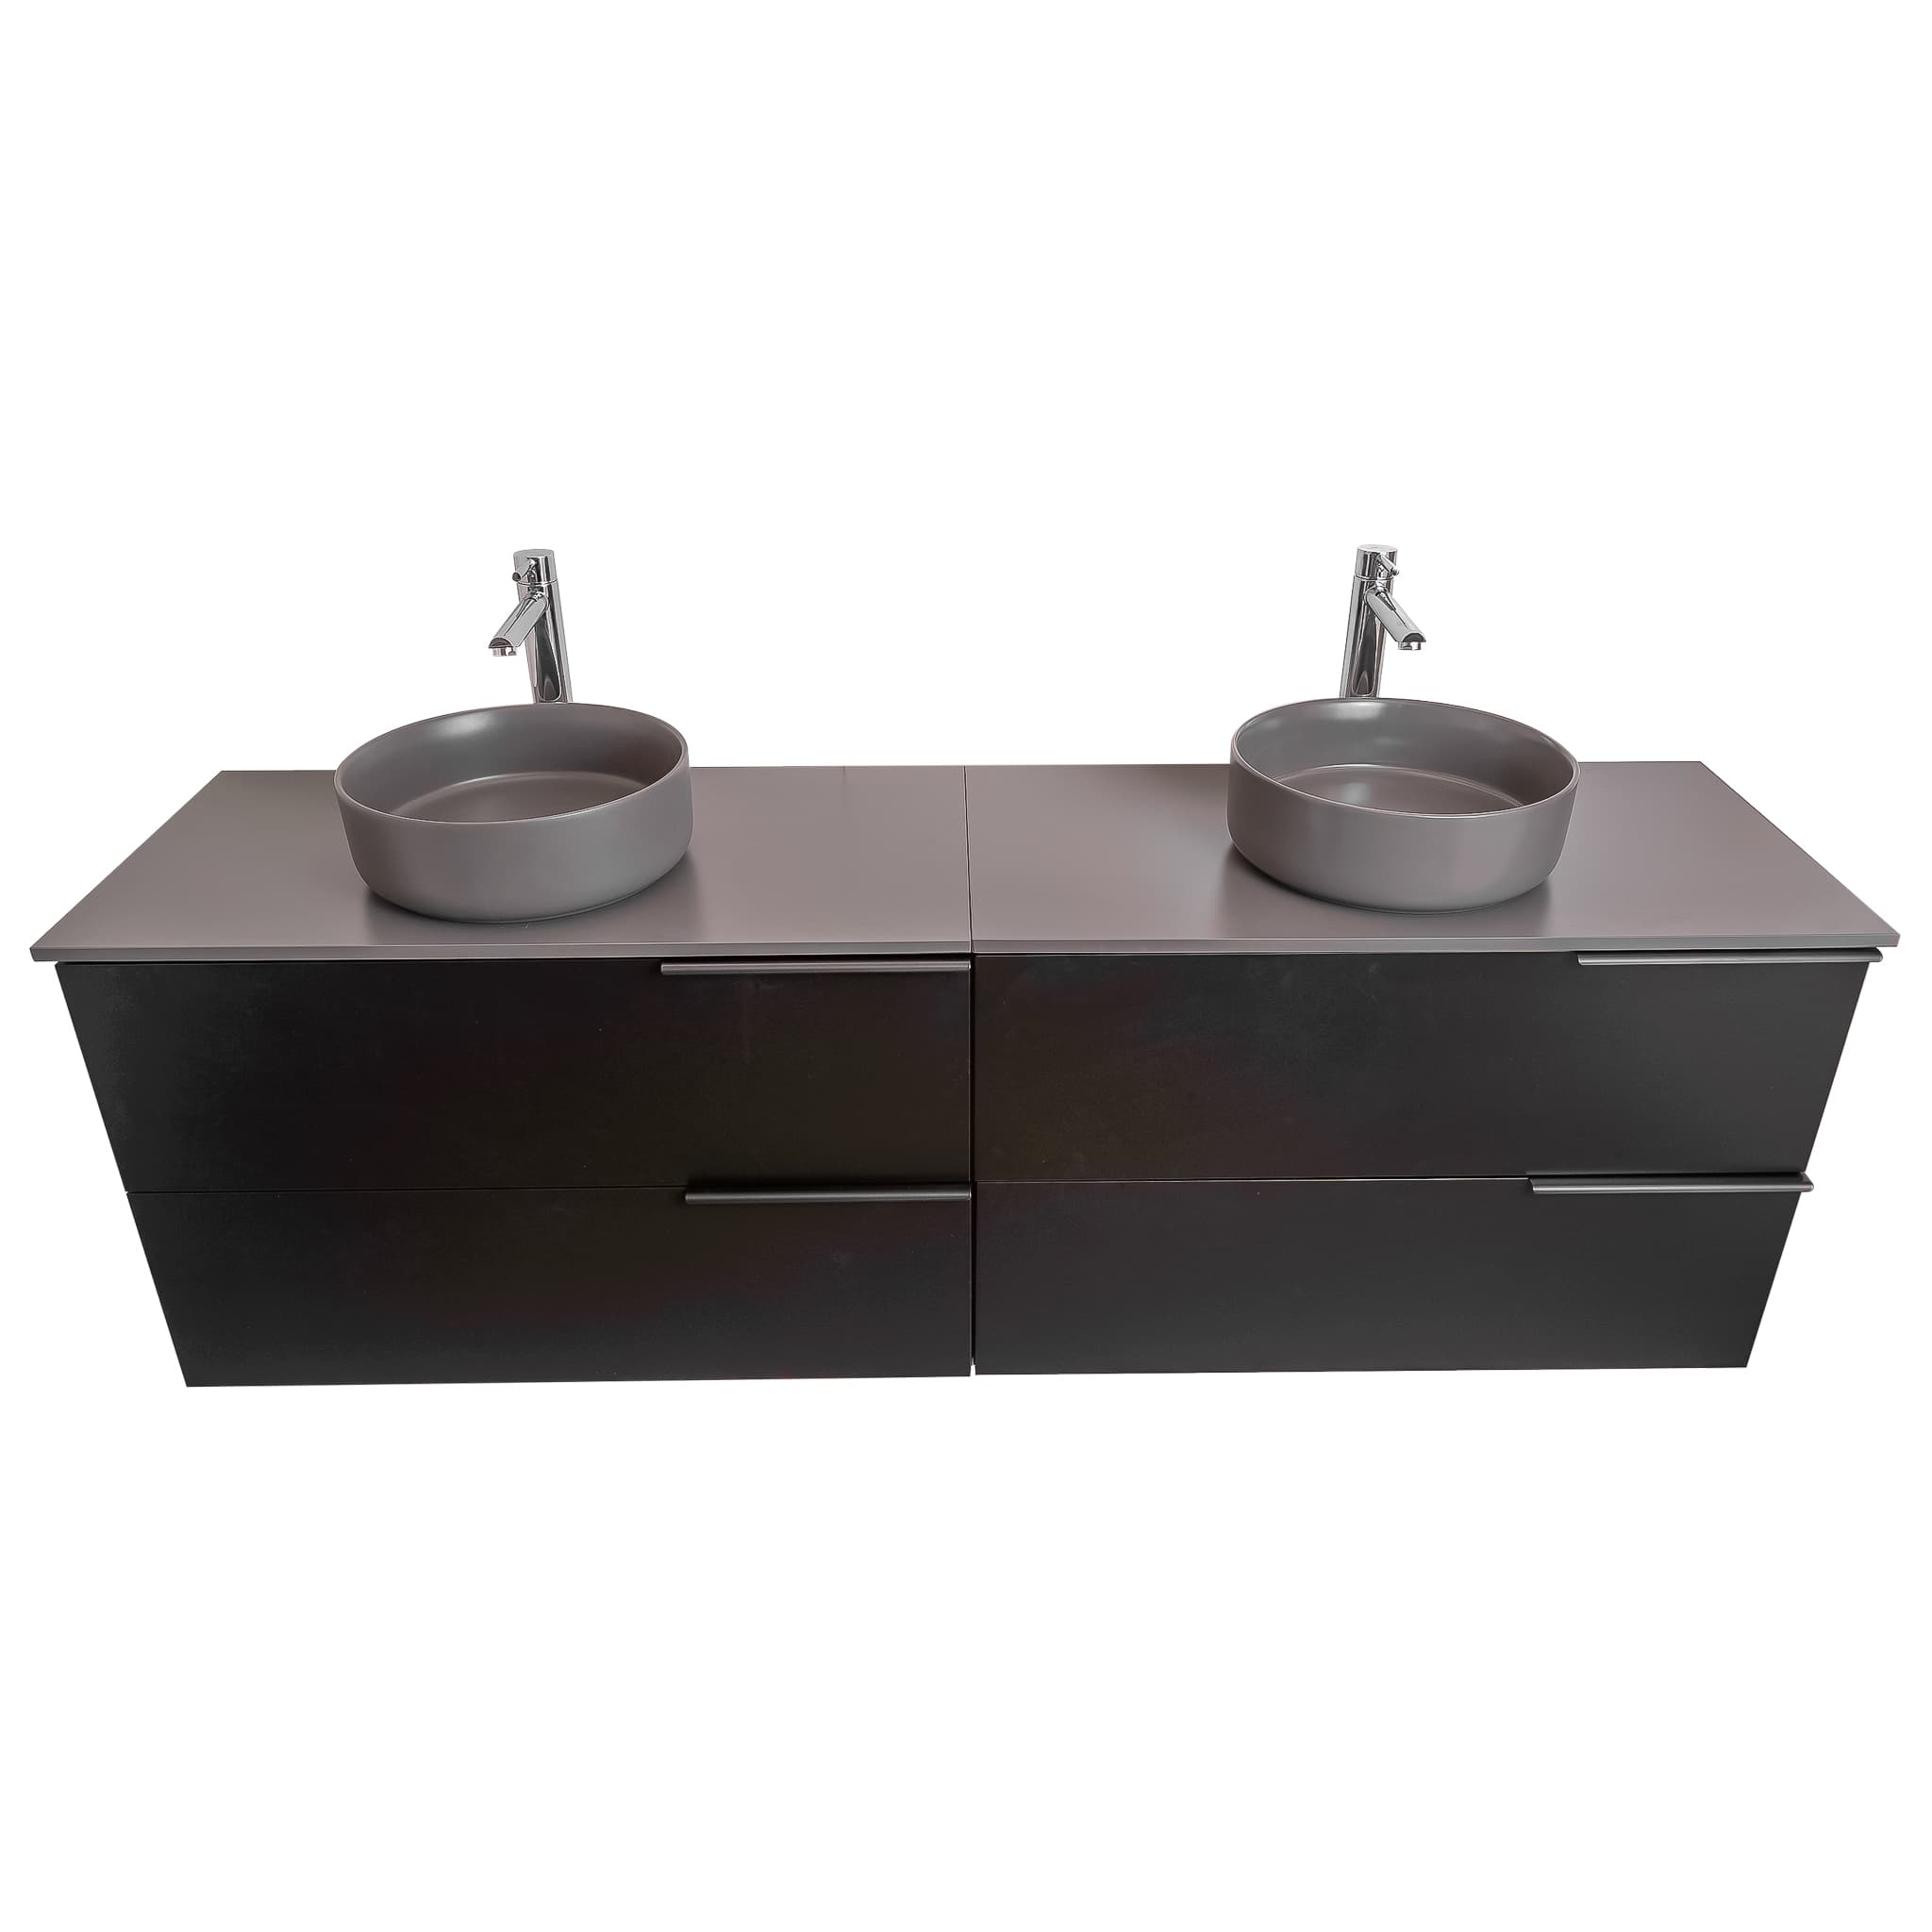 Mallorca 72 Matte Black Cabinet, Ares Grey Ceniza Top And Two Ares Grey Ceniza Ceramic Basin, Wall Mounted Modern Vanity Set